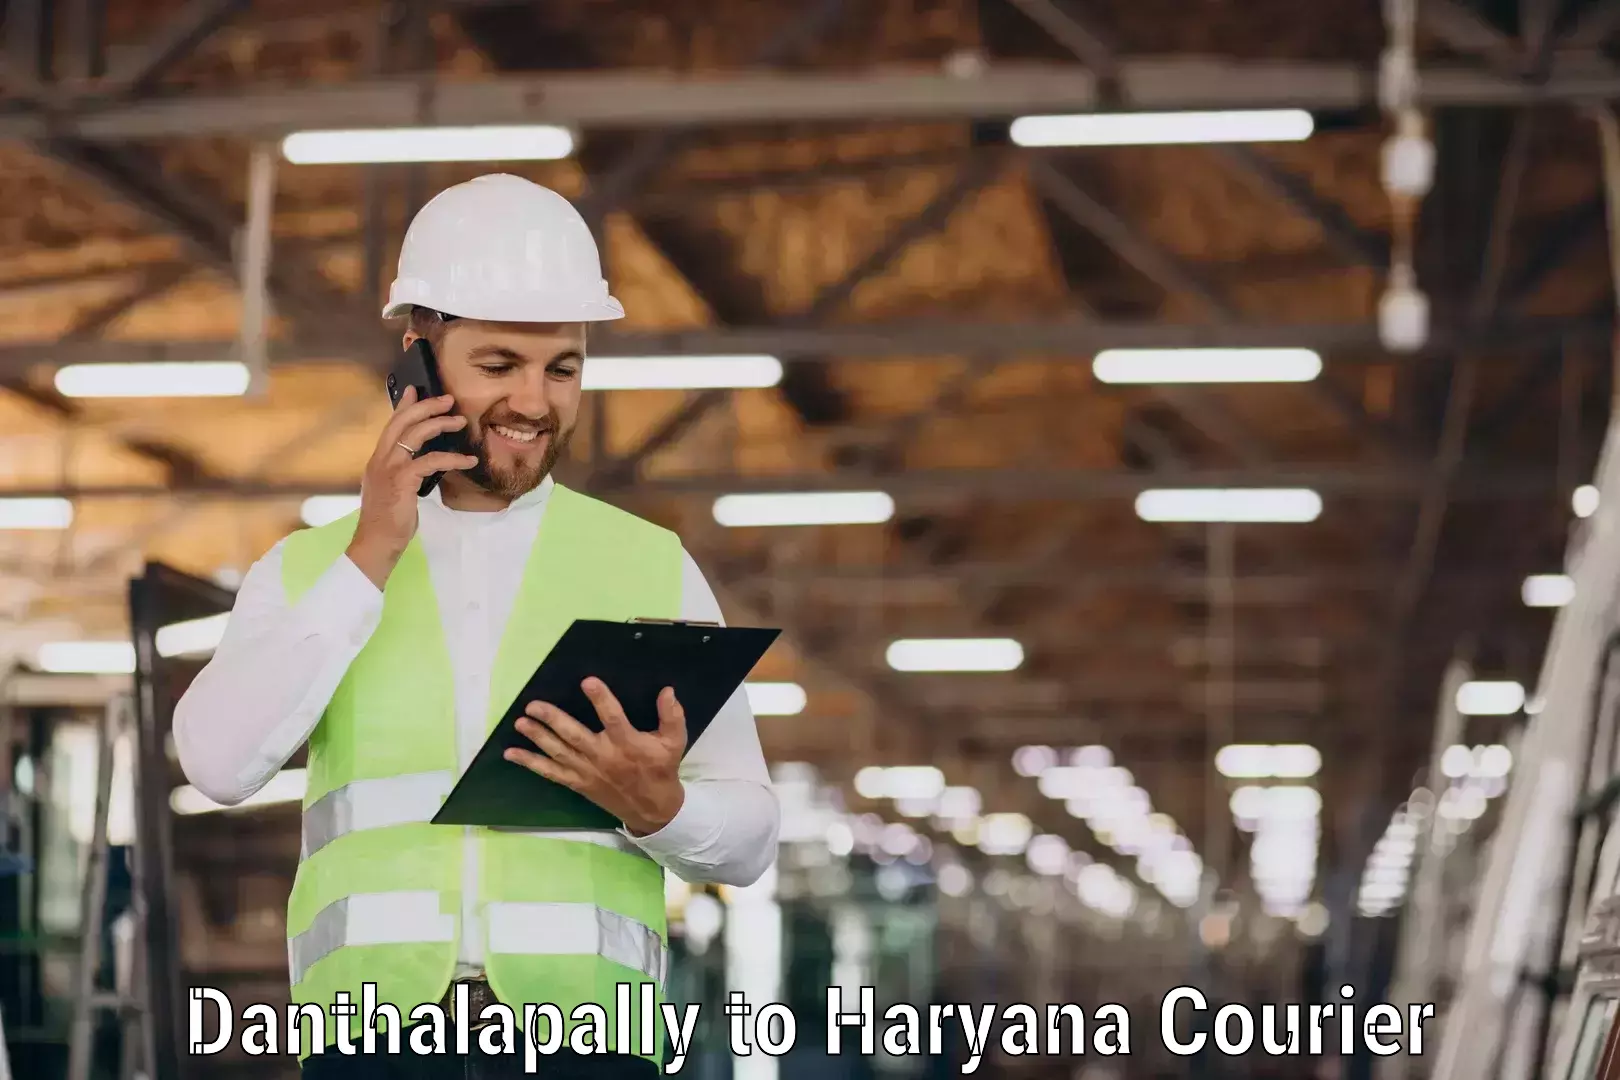 Package delivery network Danthalapally to Haryana